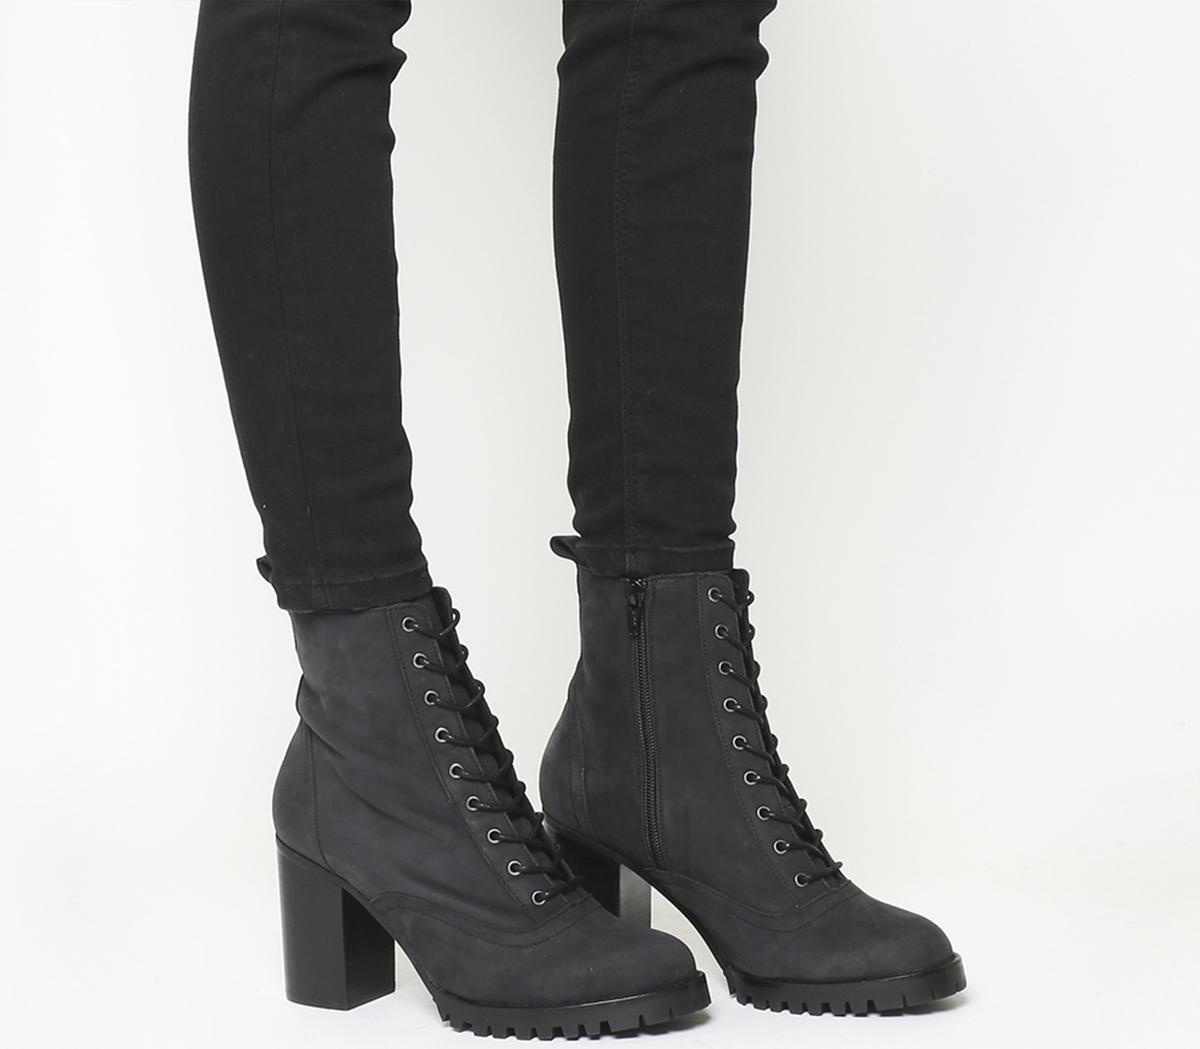 lace up boots with block heel